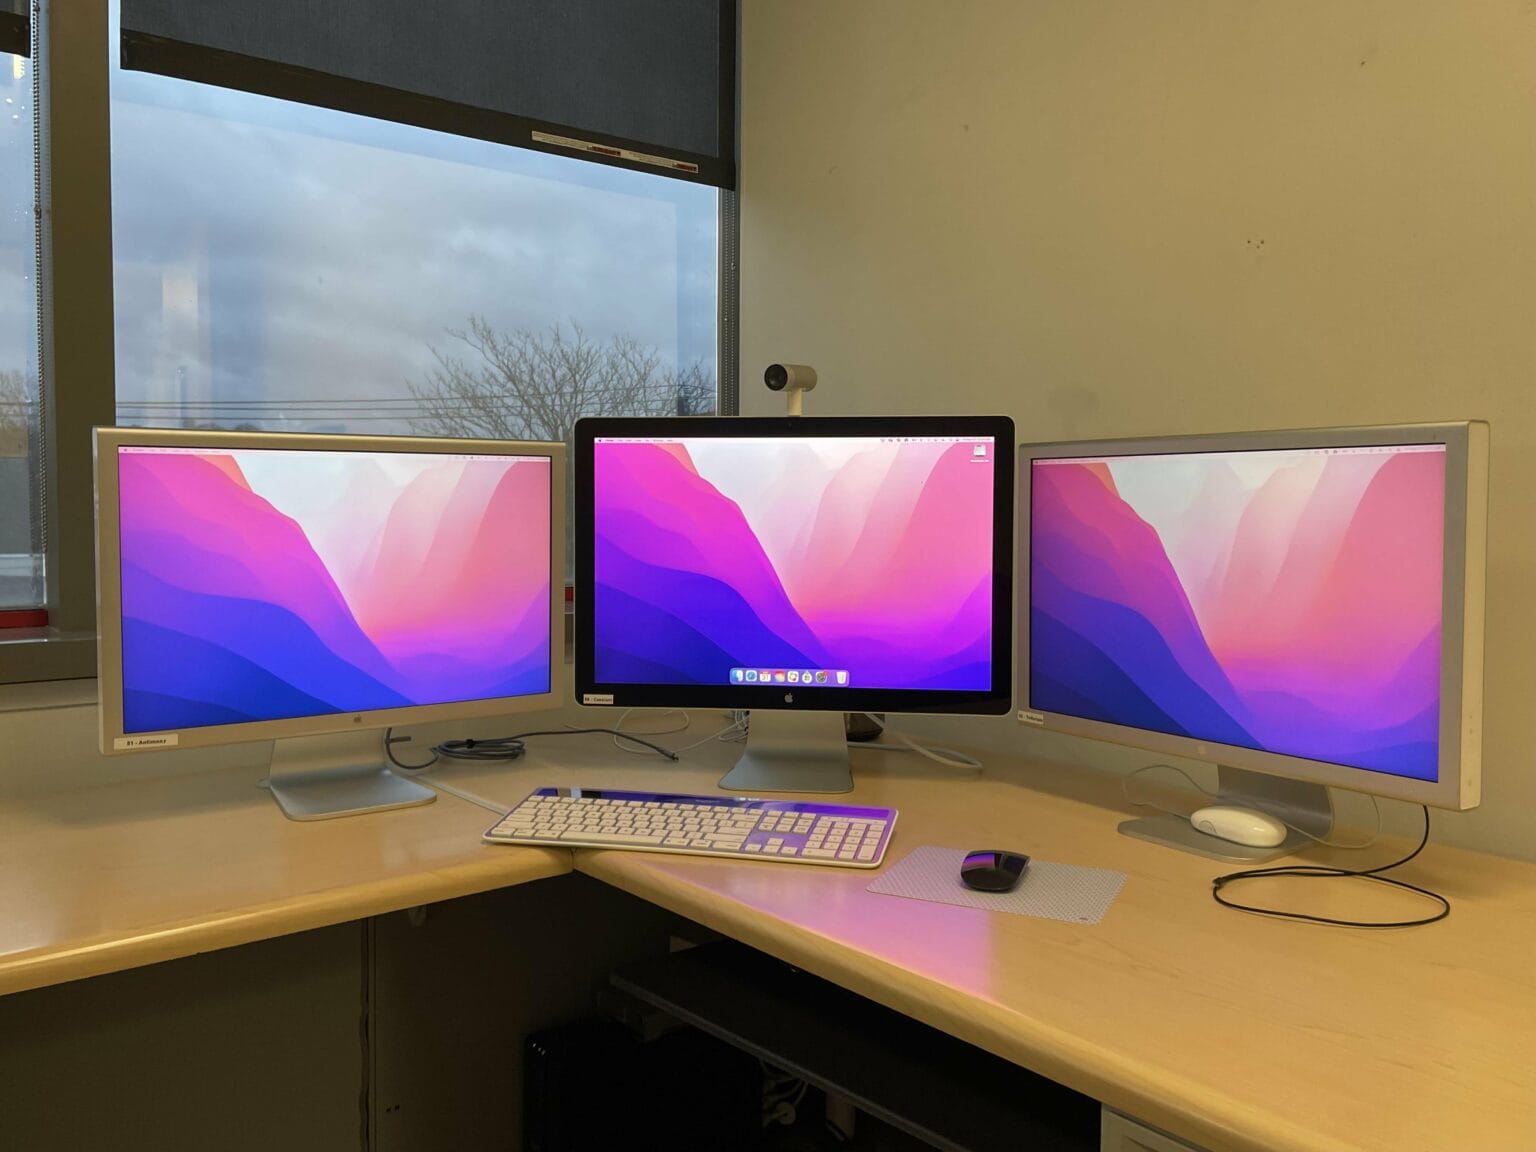 You can't see it, but a Mac Pro from 2013 drives this trio of Cinema Displays.